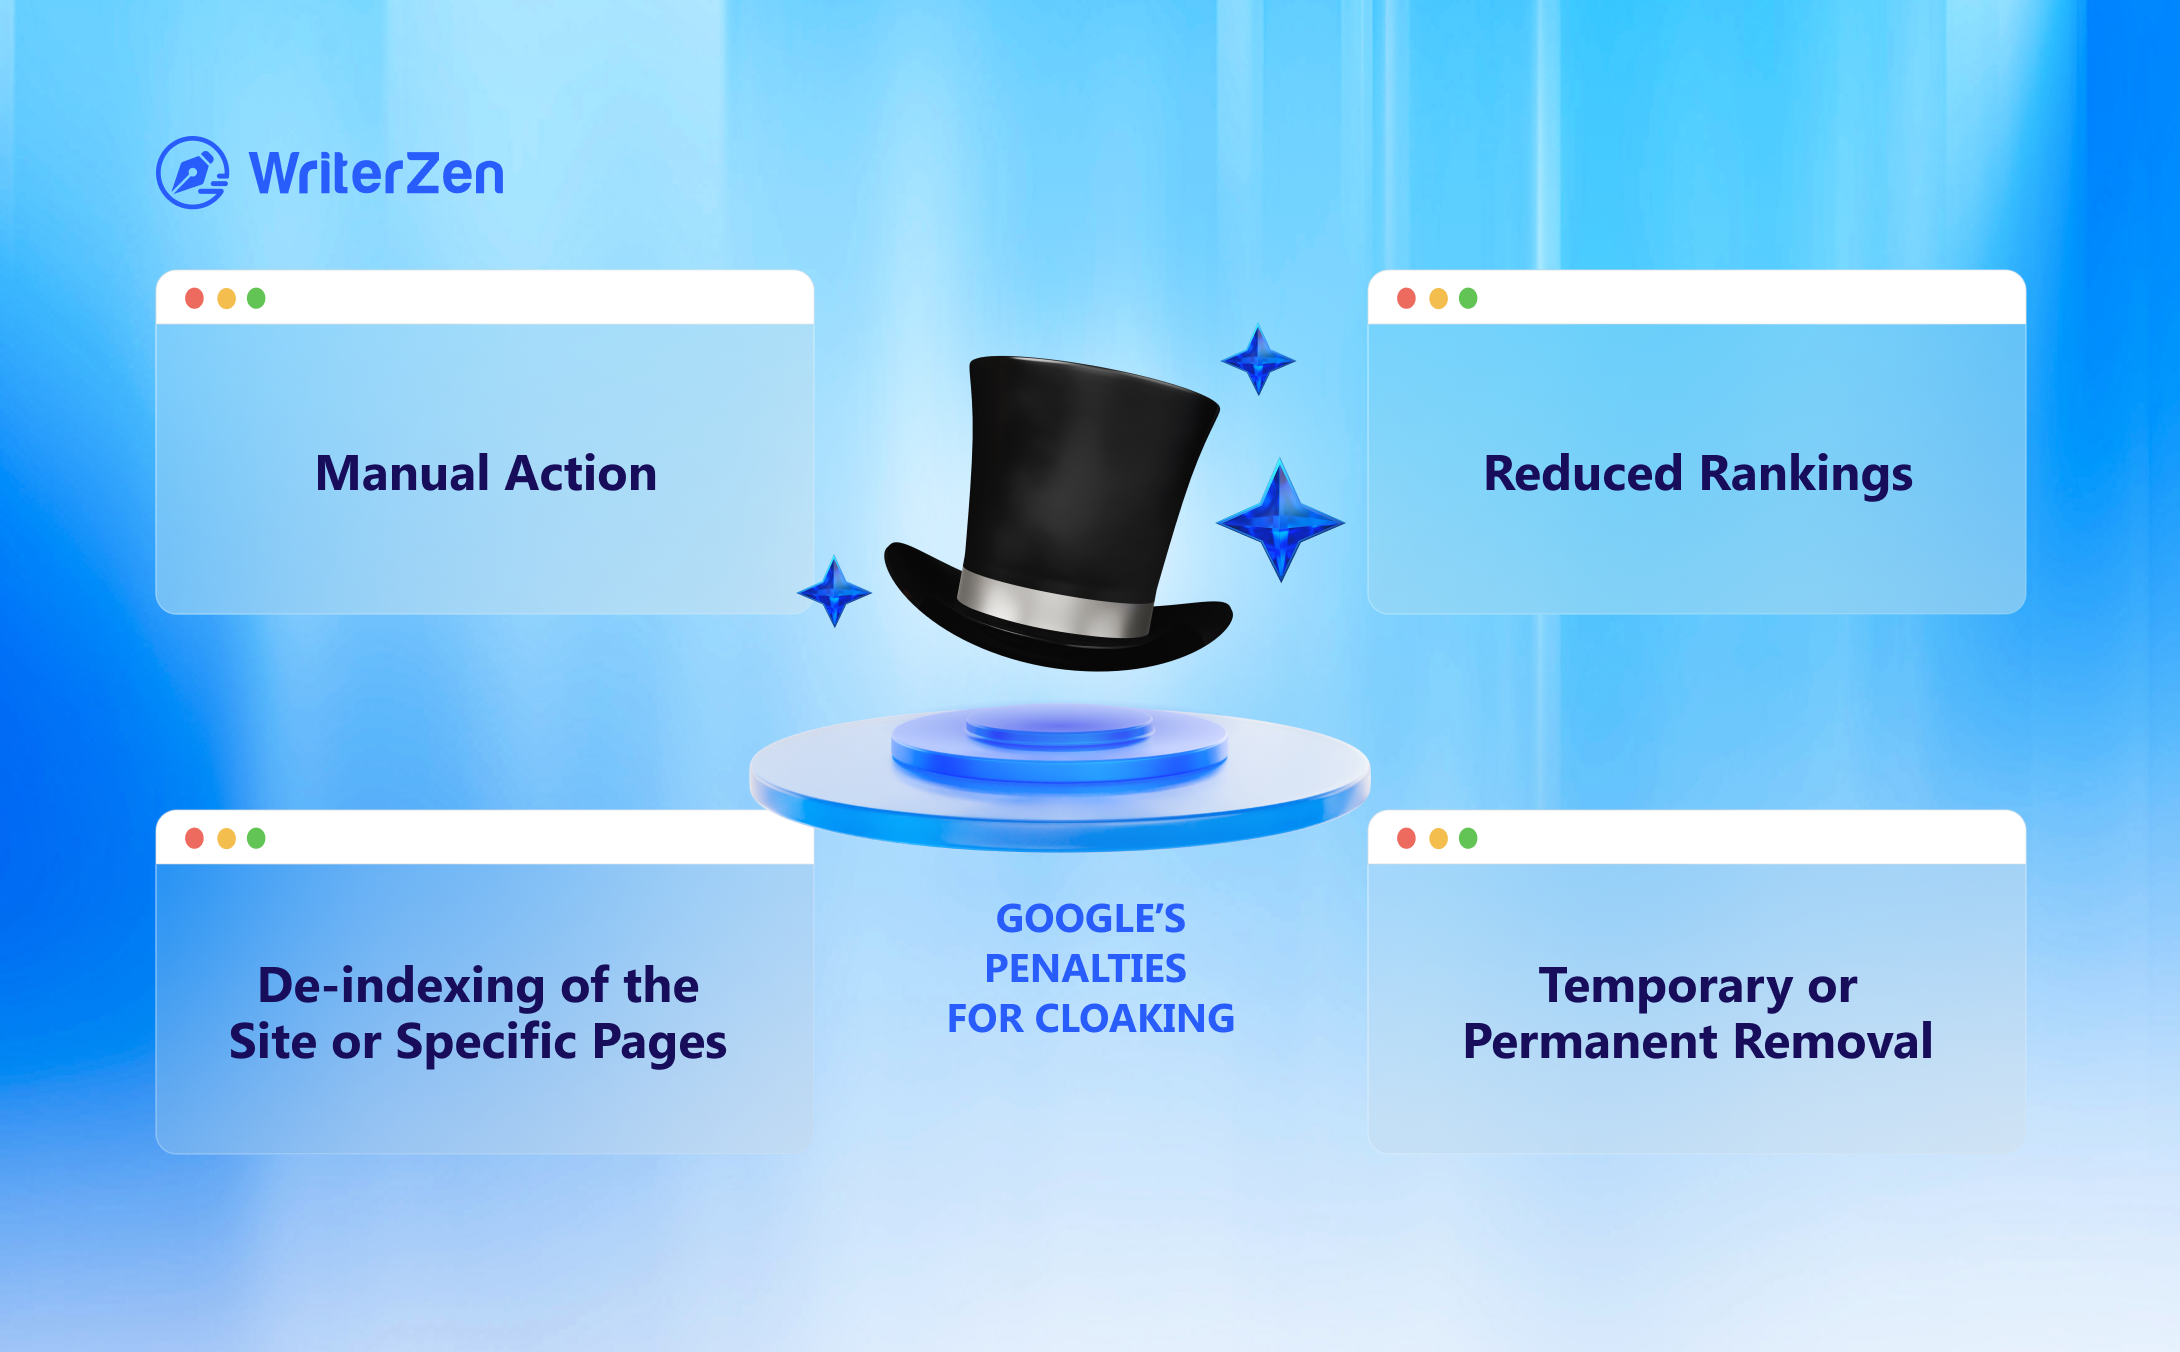 Google's Penalties for Cloaking